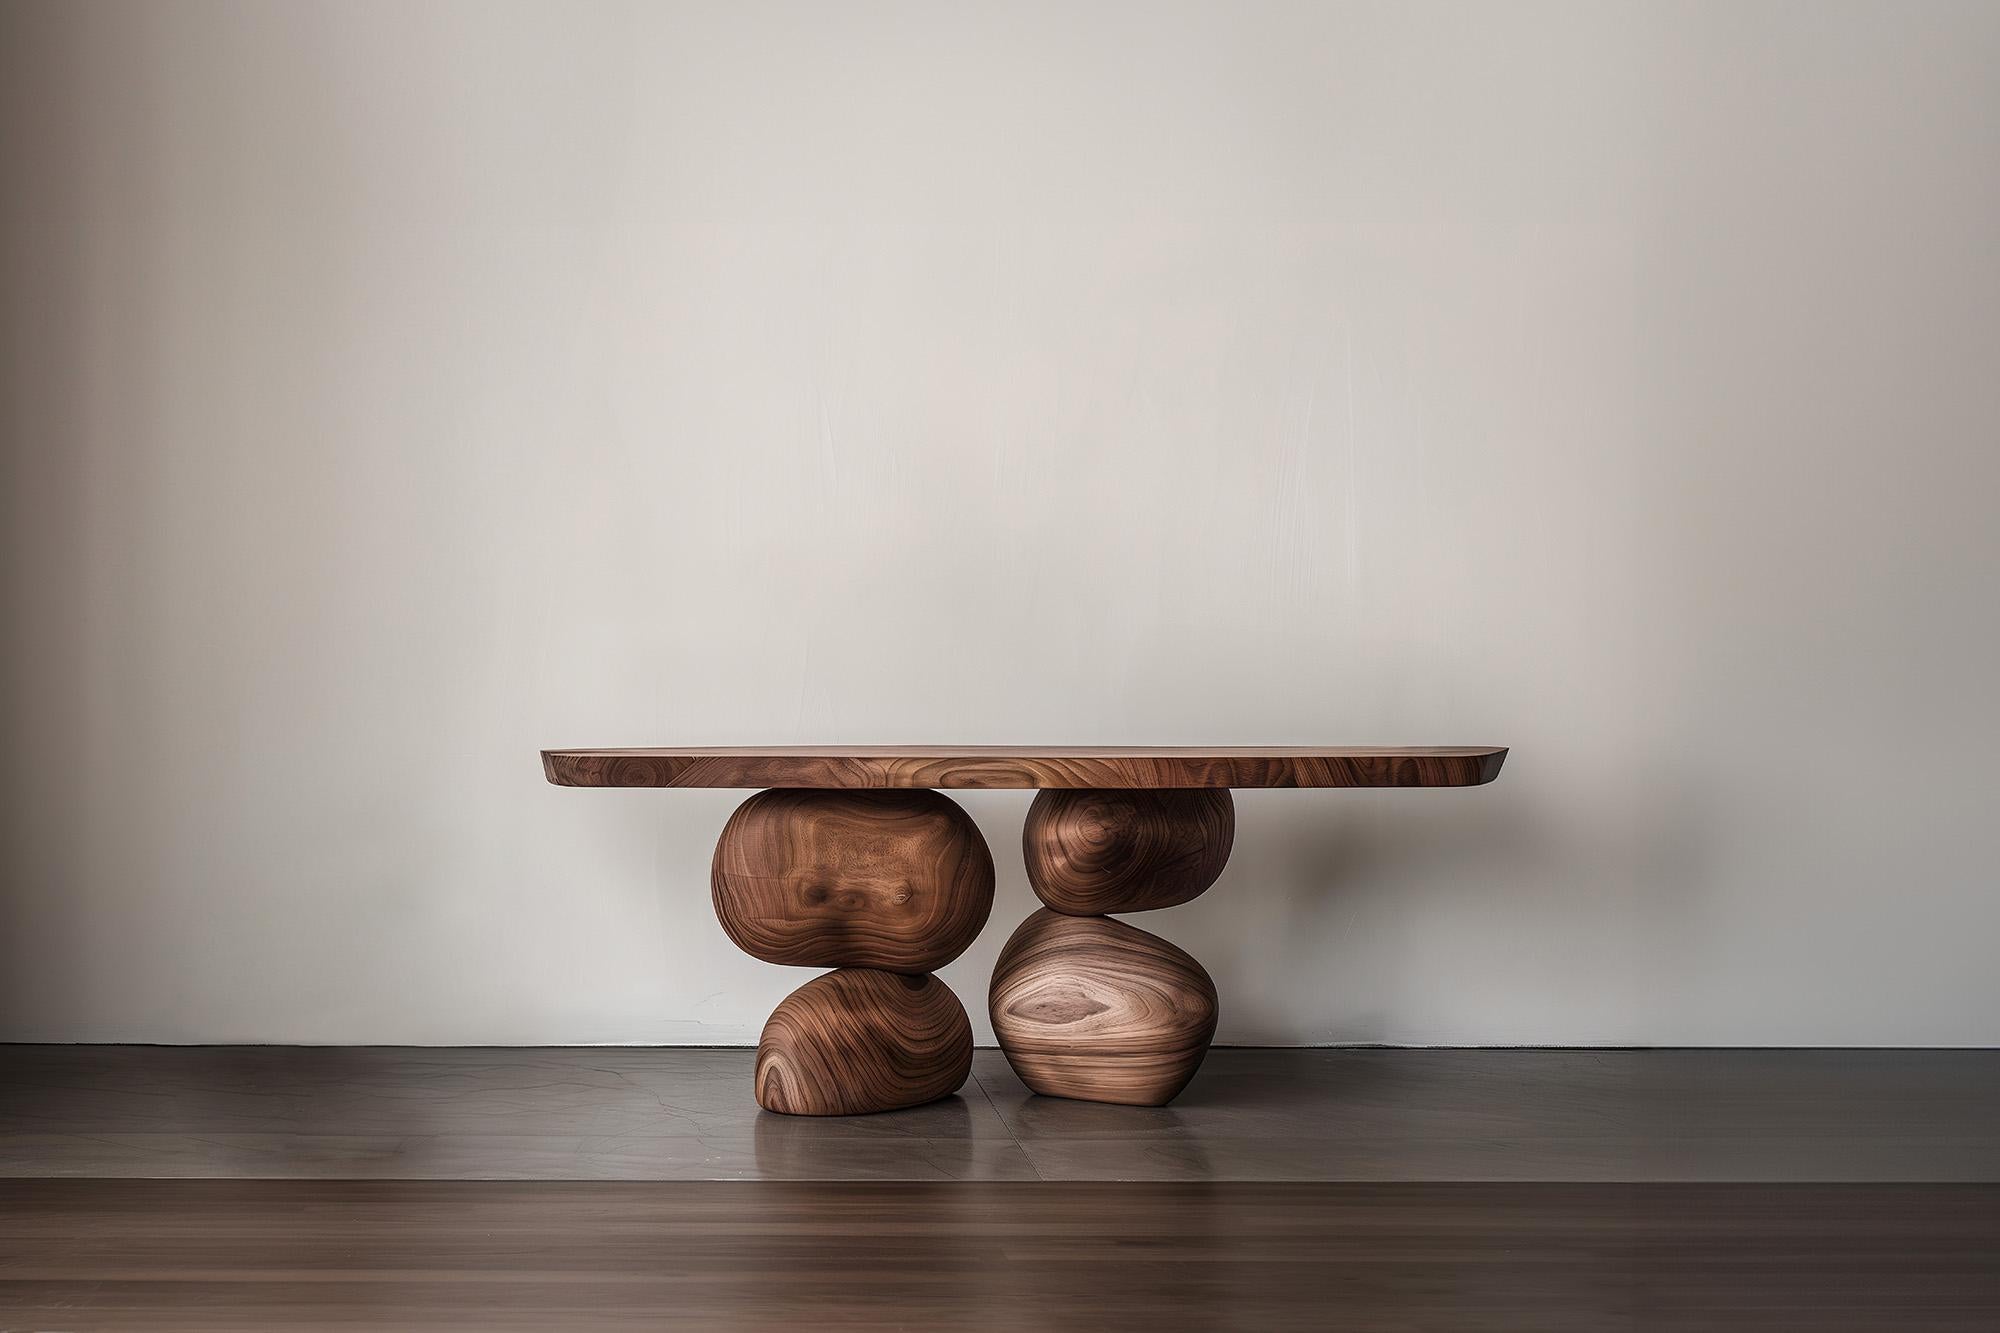 NONO Elefante Console Table 23, Flowing Lines, Solid Craft
—————————————————————
Elefante Collection: A Harmony of Design and Heritage by NONO

Crafting Elegance with a Modernist Touch

NONO, renowned for its decade-long journey in redefining